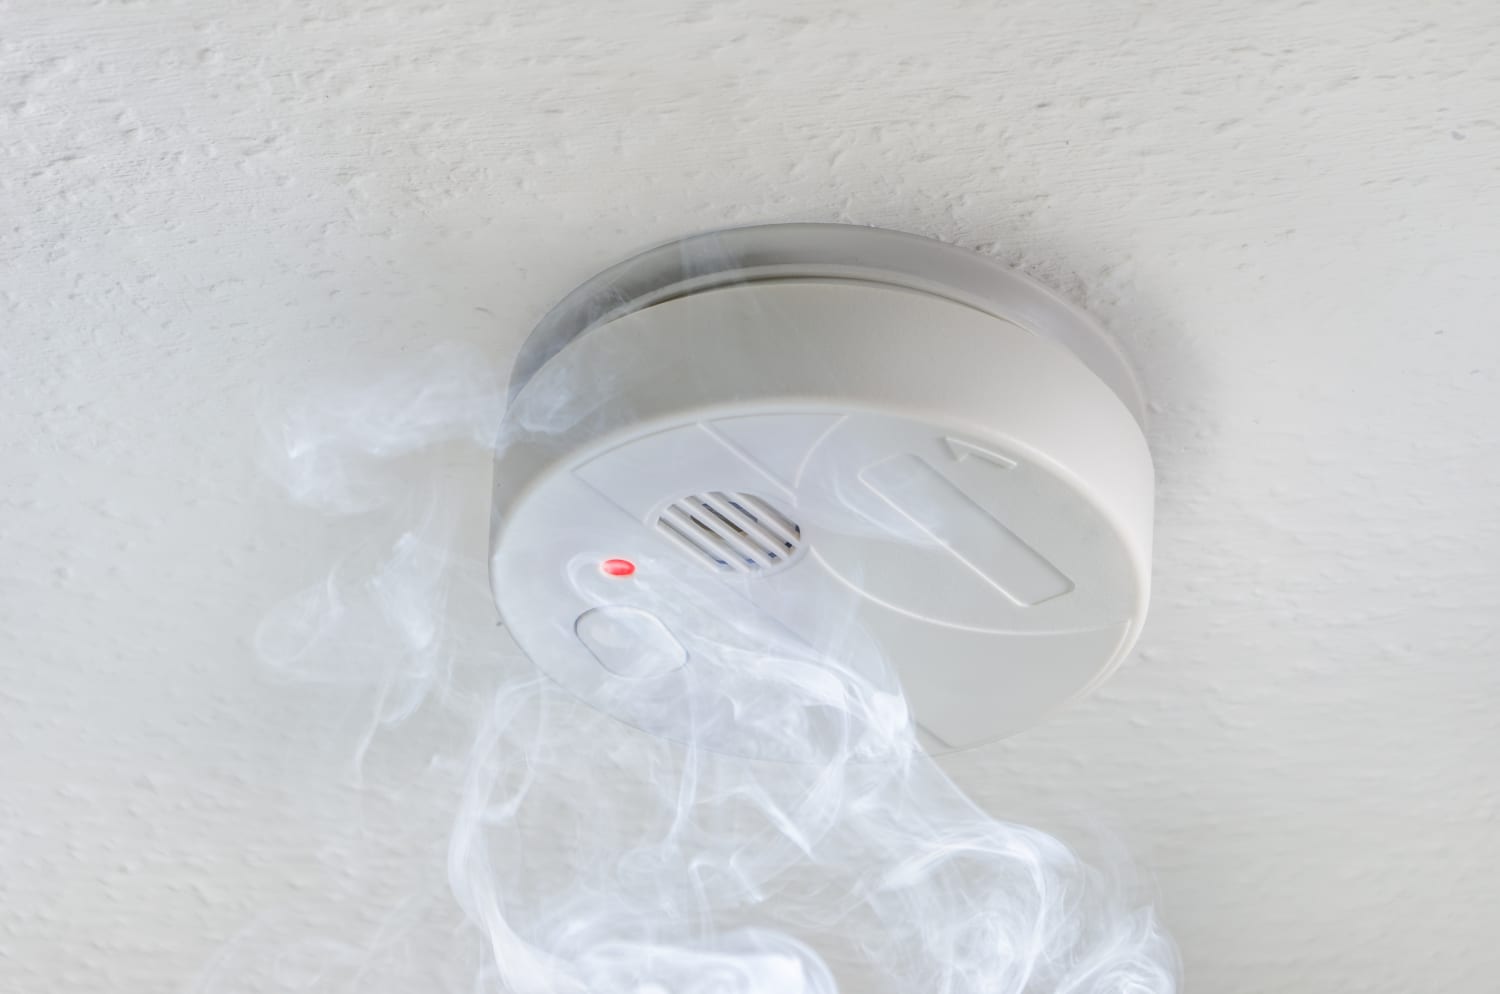 schors Identiteit Sandalen Are you SURE your smoke alarms work? Learn 3 vital tips